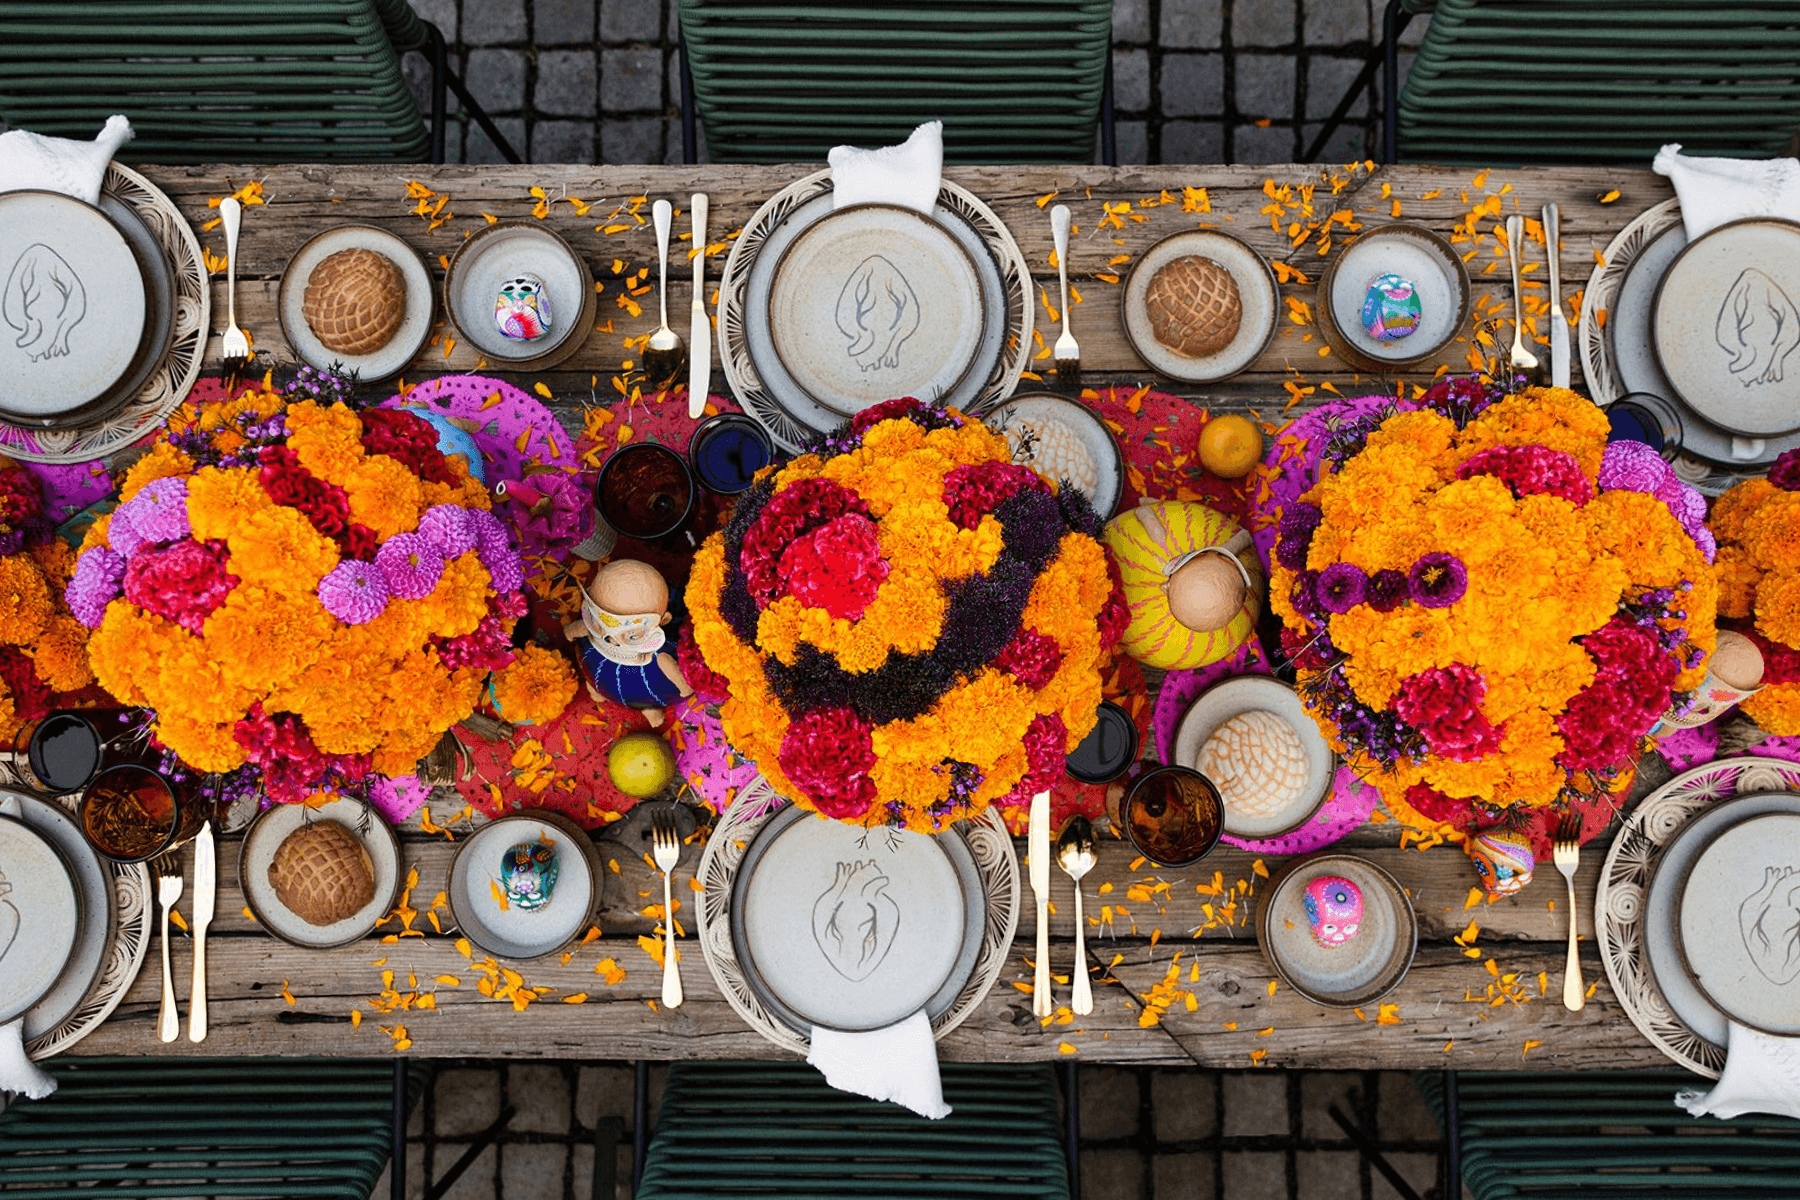 An overhead view of a tablescape that uses marigolds as a main decorative theme.